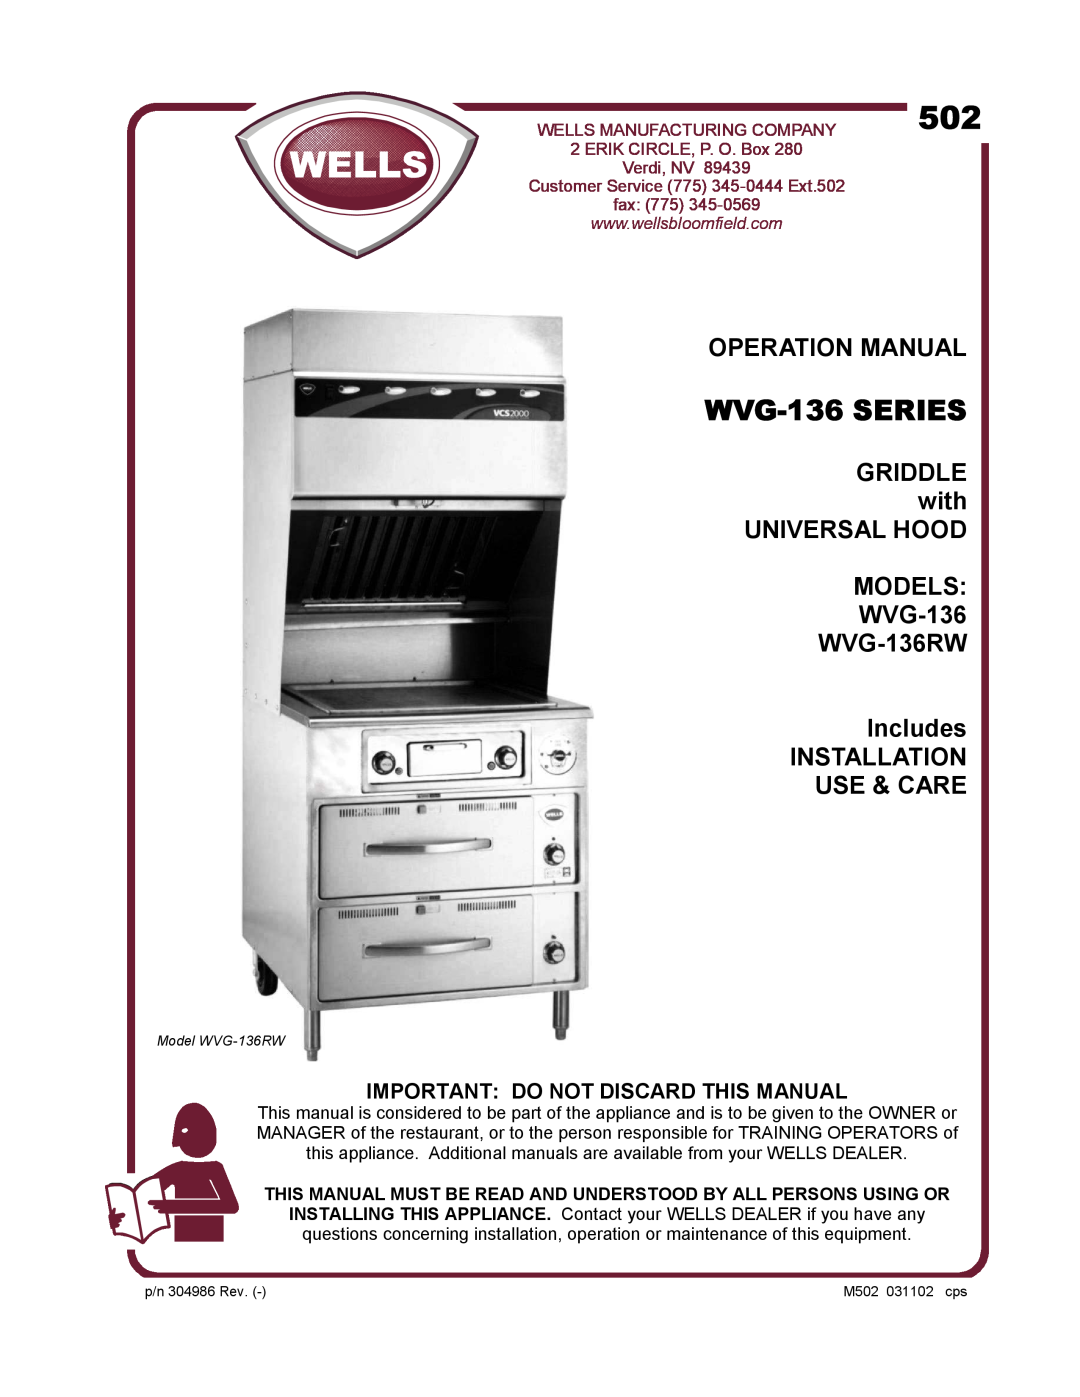 Wells operation manual Operation Manual, GRIDDLE with UNIVERSAL HOOD MODELS WVG-136 WVG-136RW Includes, WVG-136 SERIES 